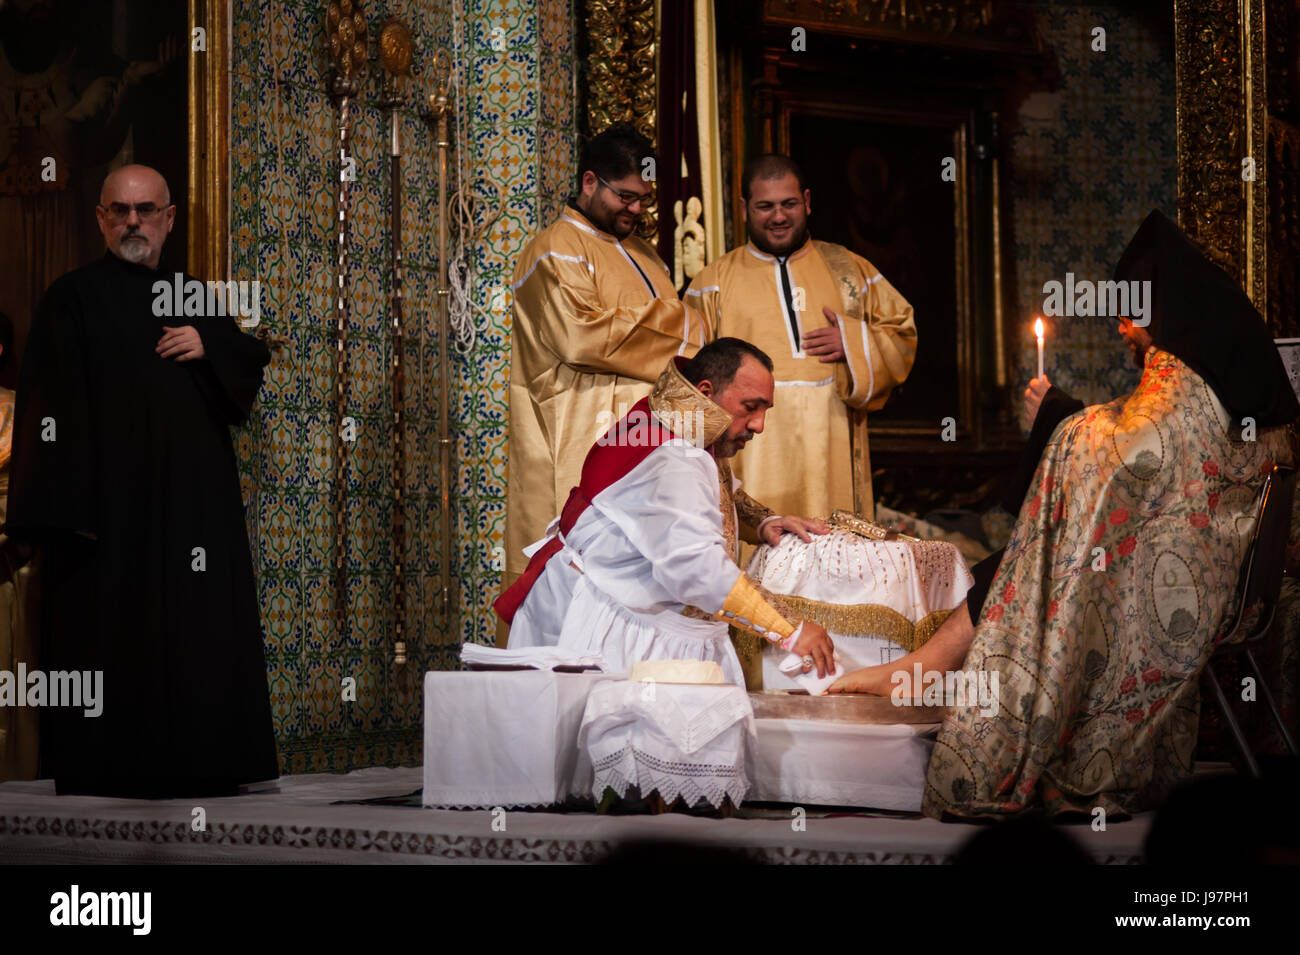 Armenian Patriarch of Jerusalem, Nourhan Manougian, washes the feet of fellow clergy during a special Maundy Thursday mass in the Cathedral of St. James in the Old City of Jerusalem, April 17, 2014. The ritual commemorates Jesus' washing of his disciples feet after the Last Supper, the night brefore his arrest and crucifixion. Stock Photo